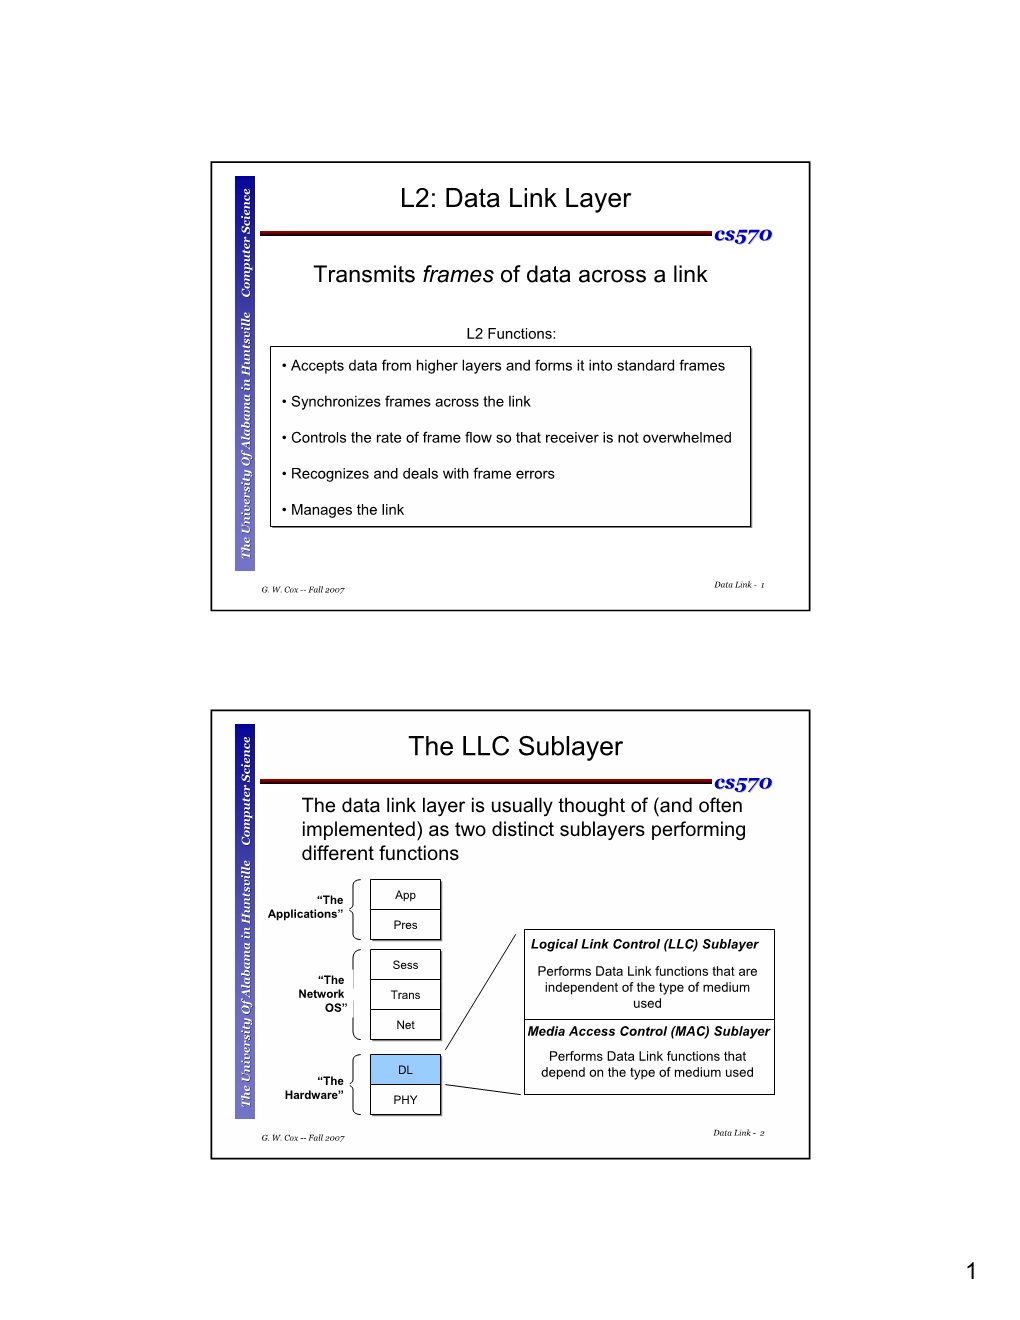 L2: Data Link Layer the LLC Sublayer